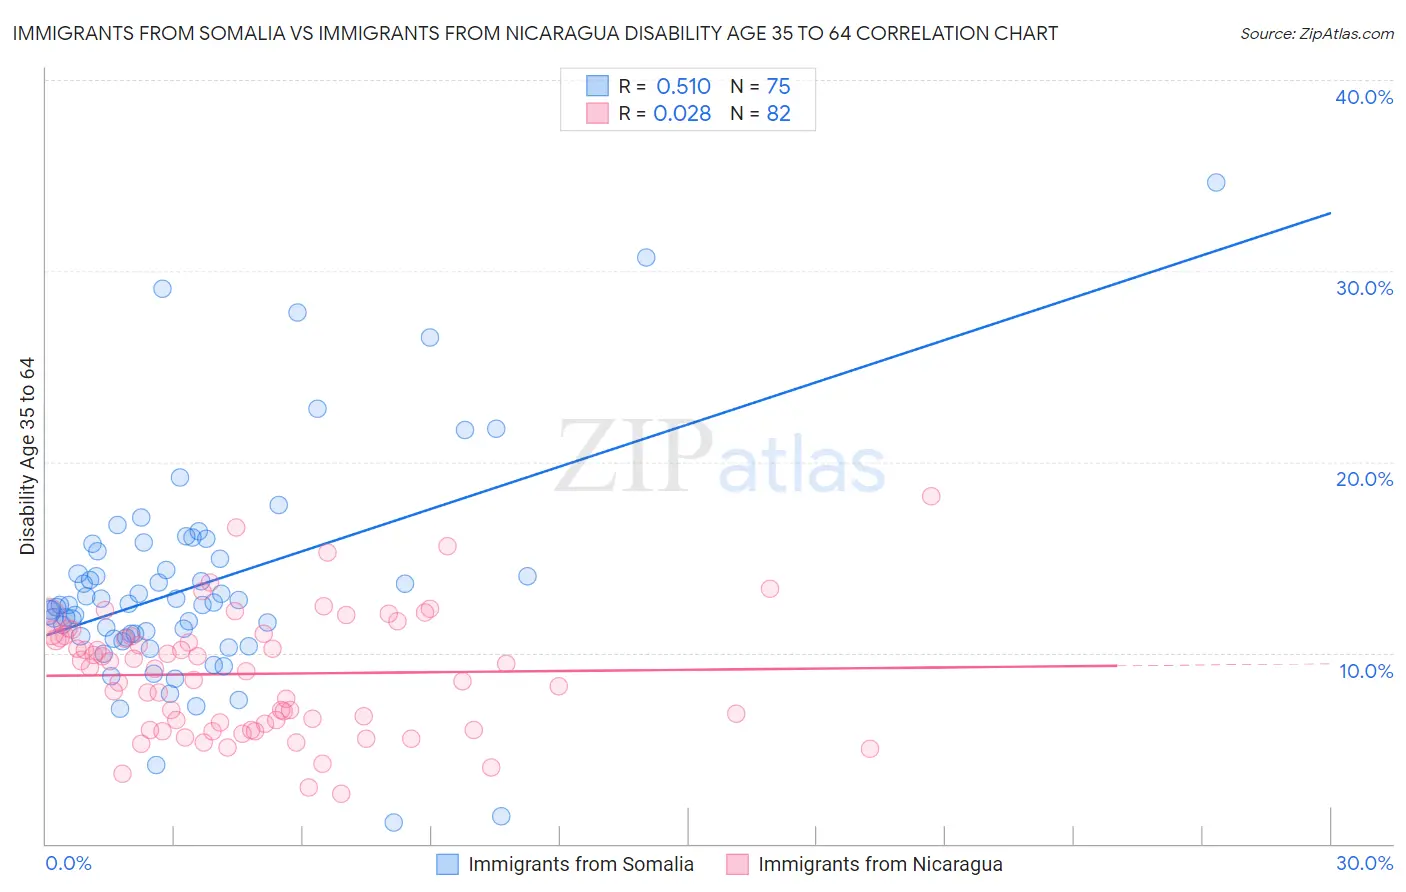 Immigrants from Somalia vs Immigrants from Nicaragua Disability Age 35 to 64